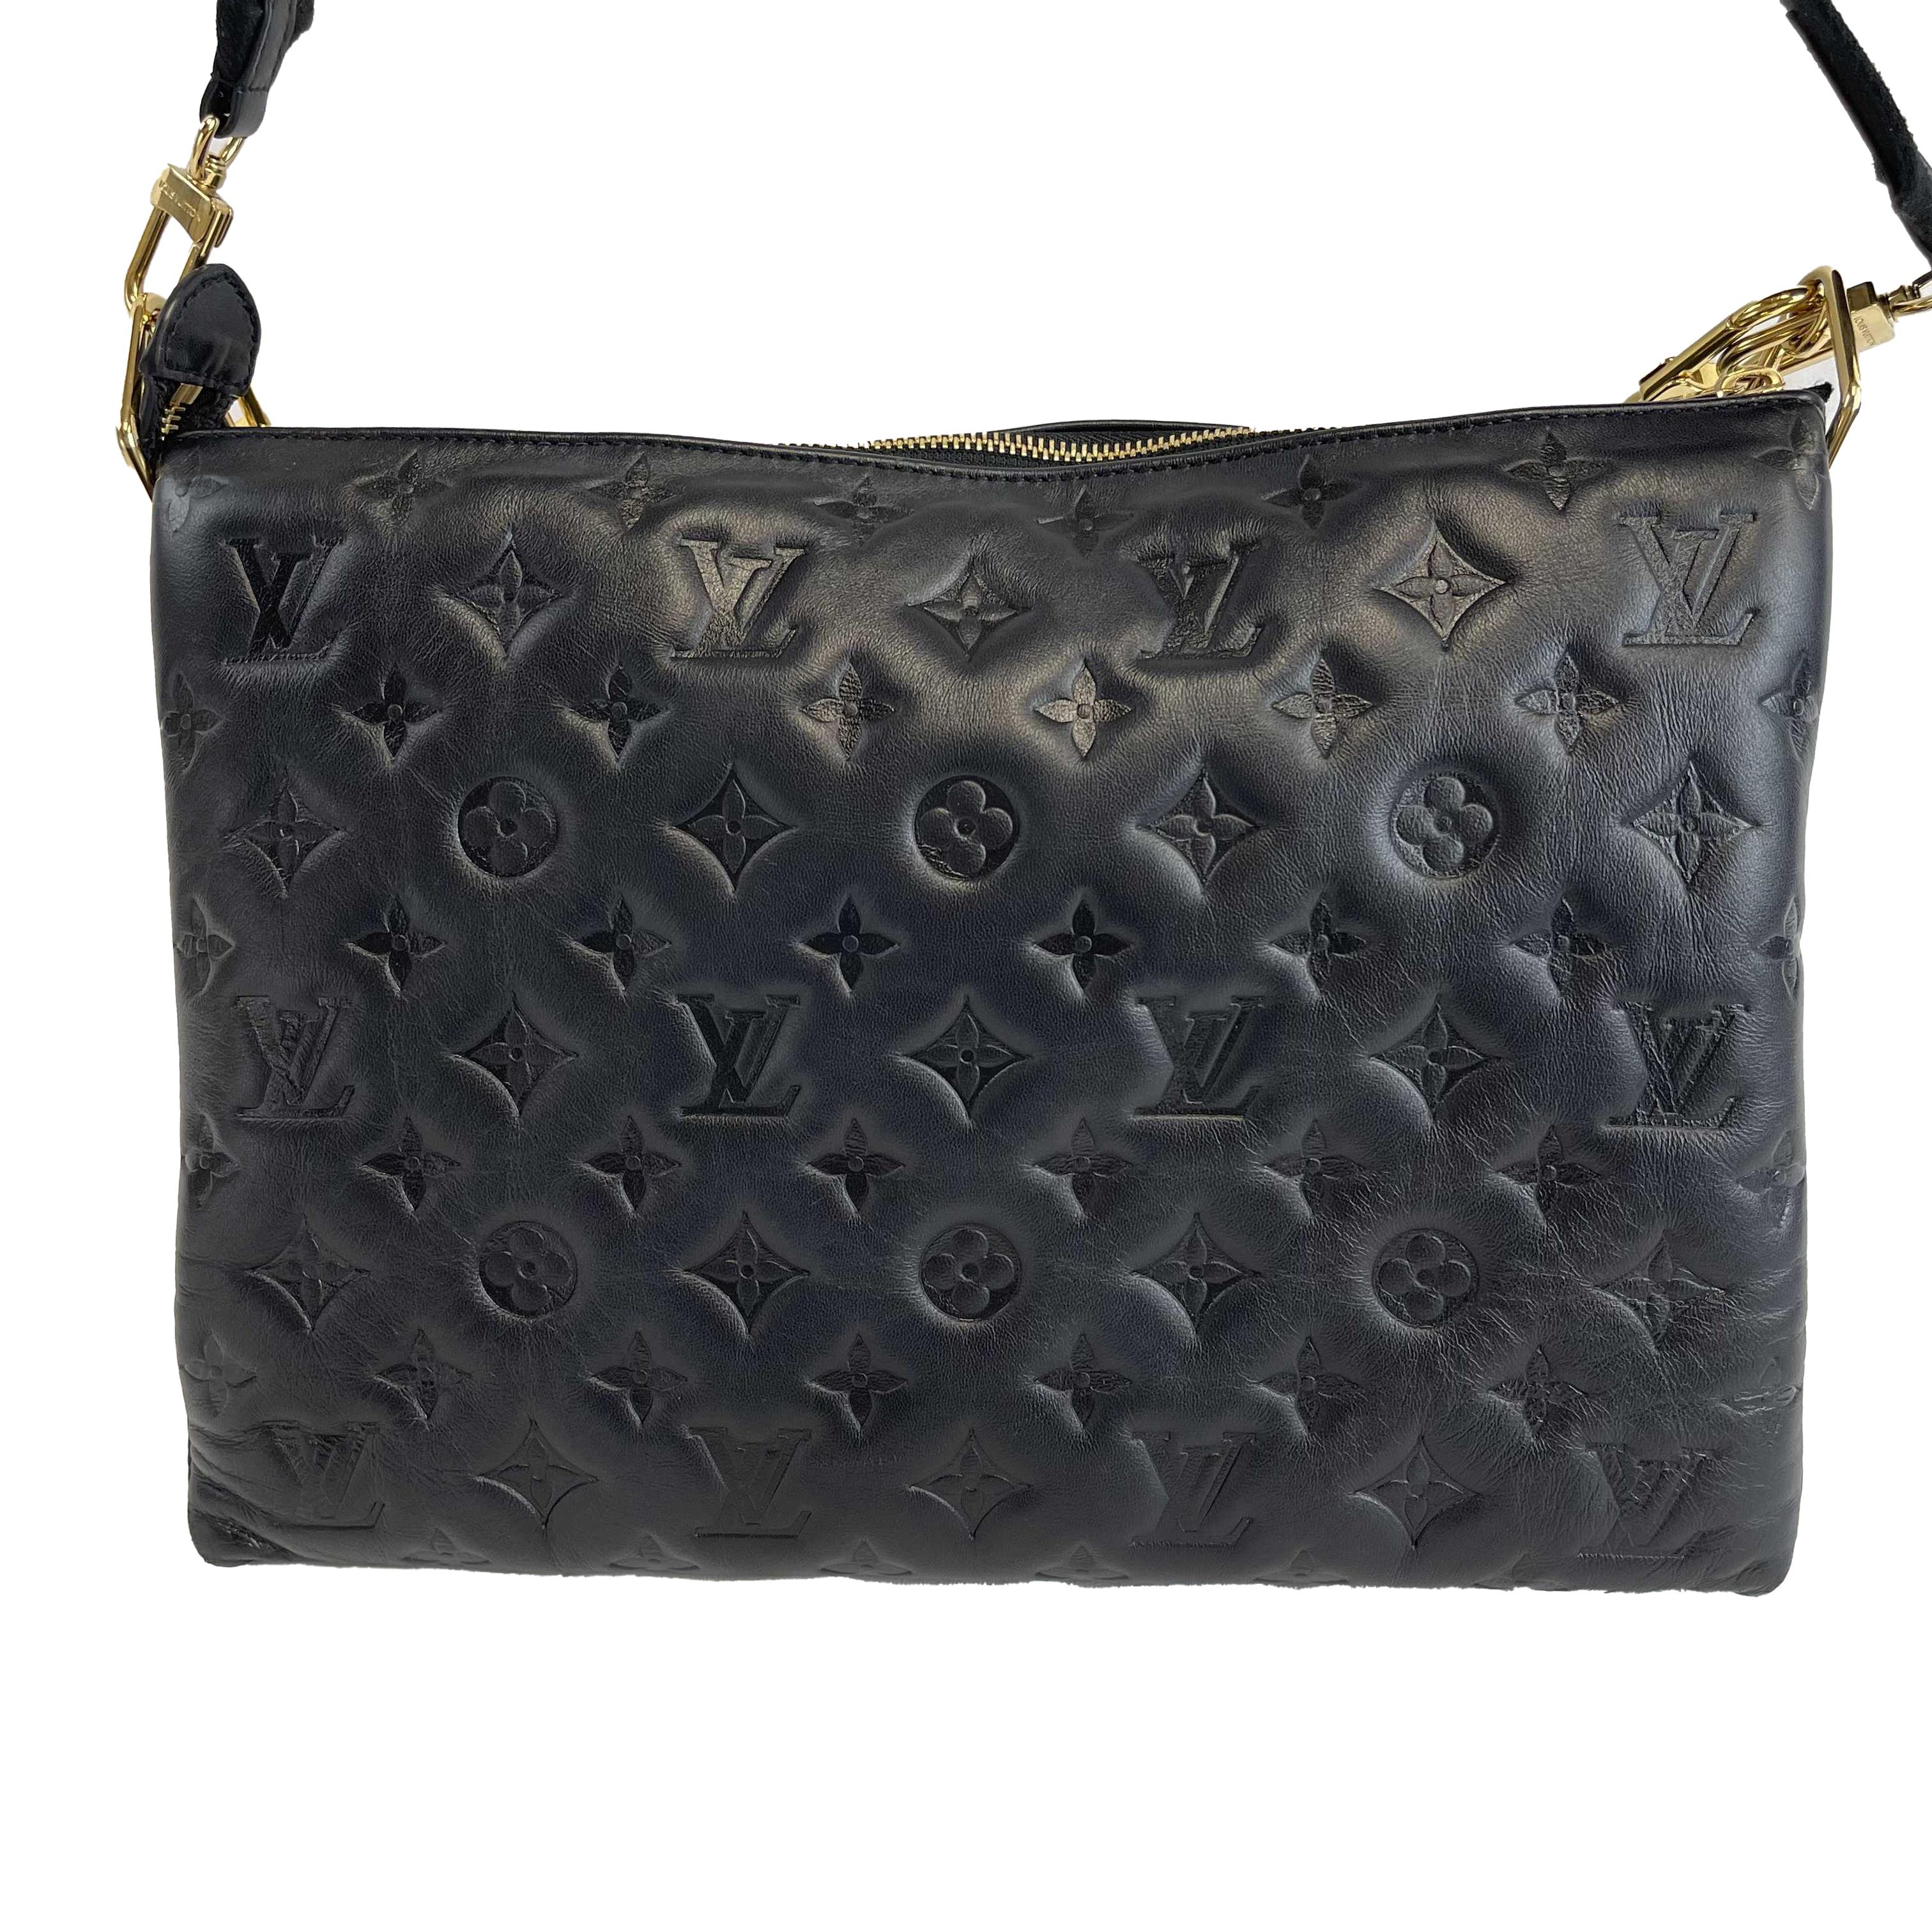 Louis Vuitton - Coussin MM - Black Leather Shoulder Bag w/ 2 Straps FULL KIT
Measurements

Width: 13 in / 33.02 cm
Height: 9 in / 22.86 cm
Depth: 4 in / 10.16 cm
Strap Drop: 13 - 21 in / 33.02 cm
Handle Drop: 9 in / 22.86 cm
Details

Made In: